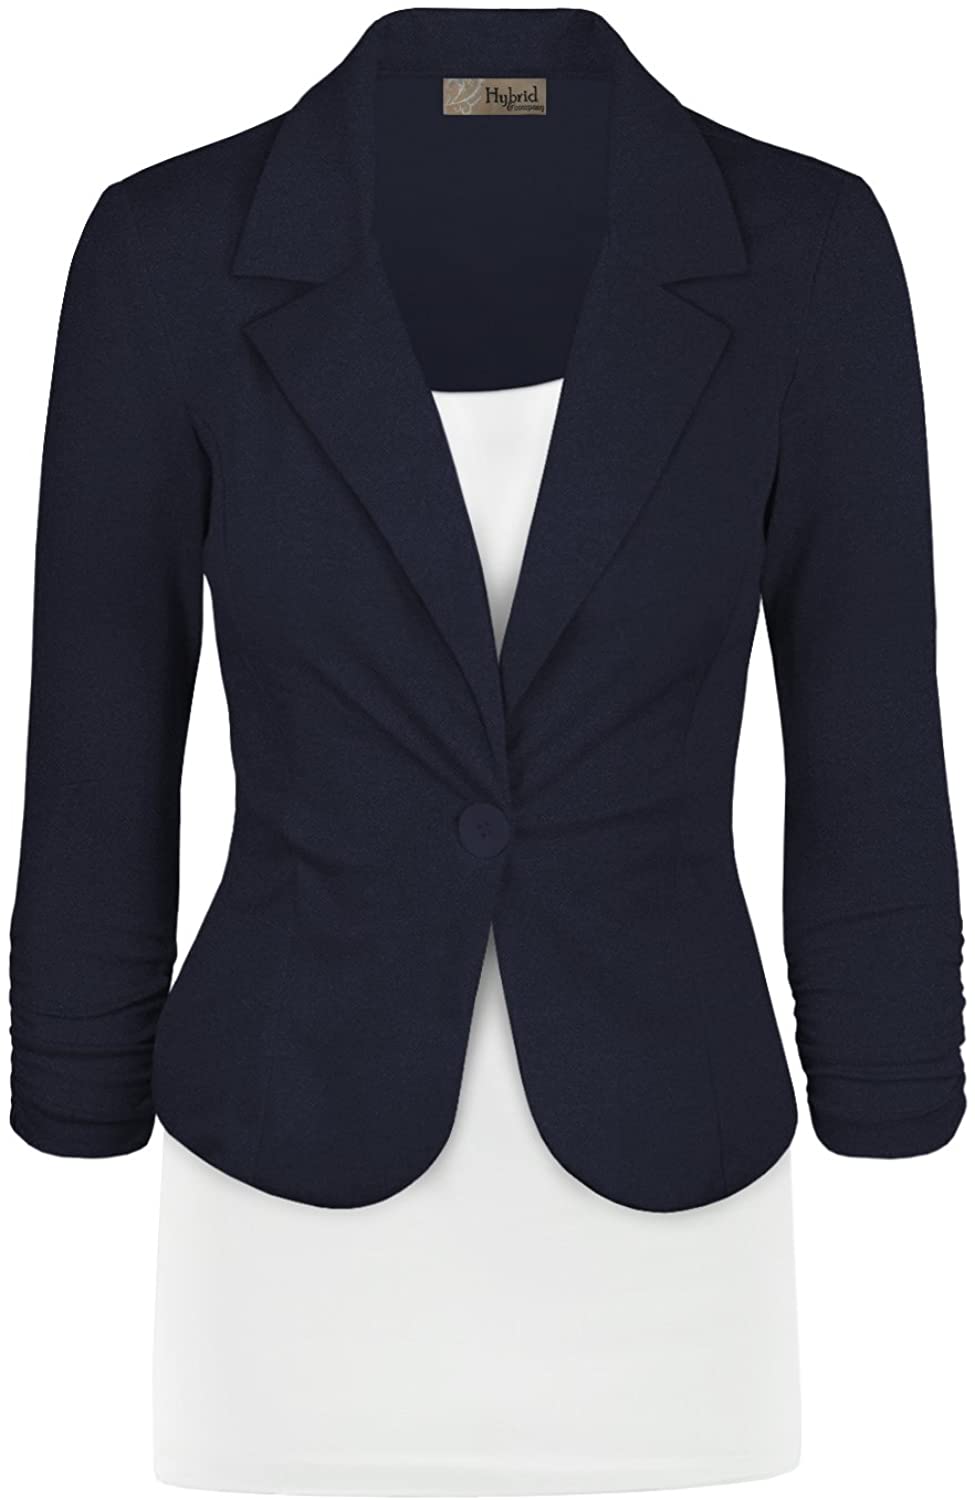 Hybrid & Company Womens Casual Work Office Open Front Blazer Jacket with Removable Shoulder Pads Made in USA 